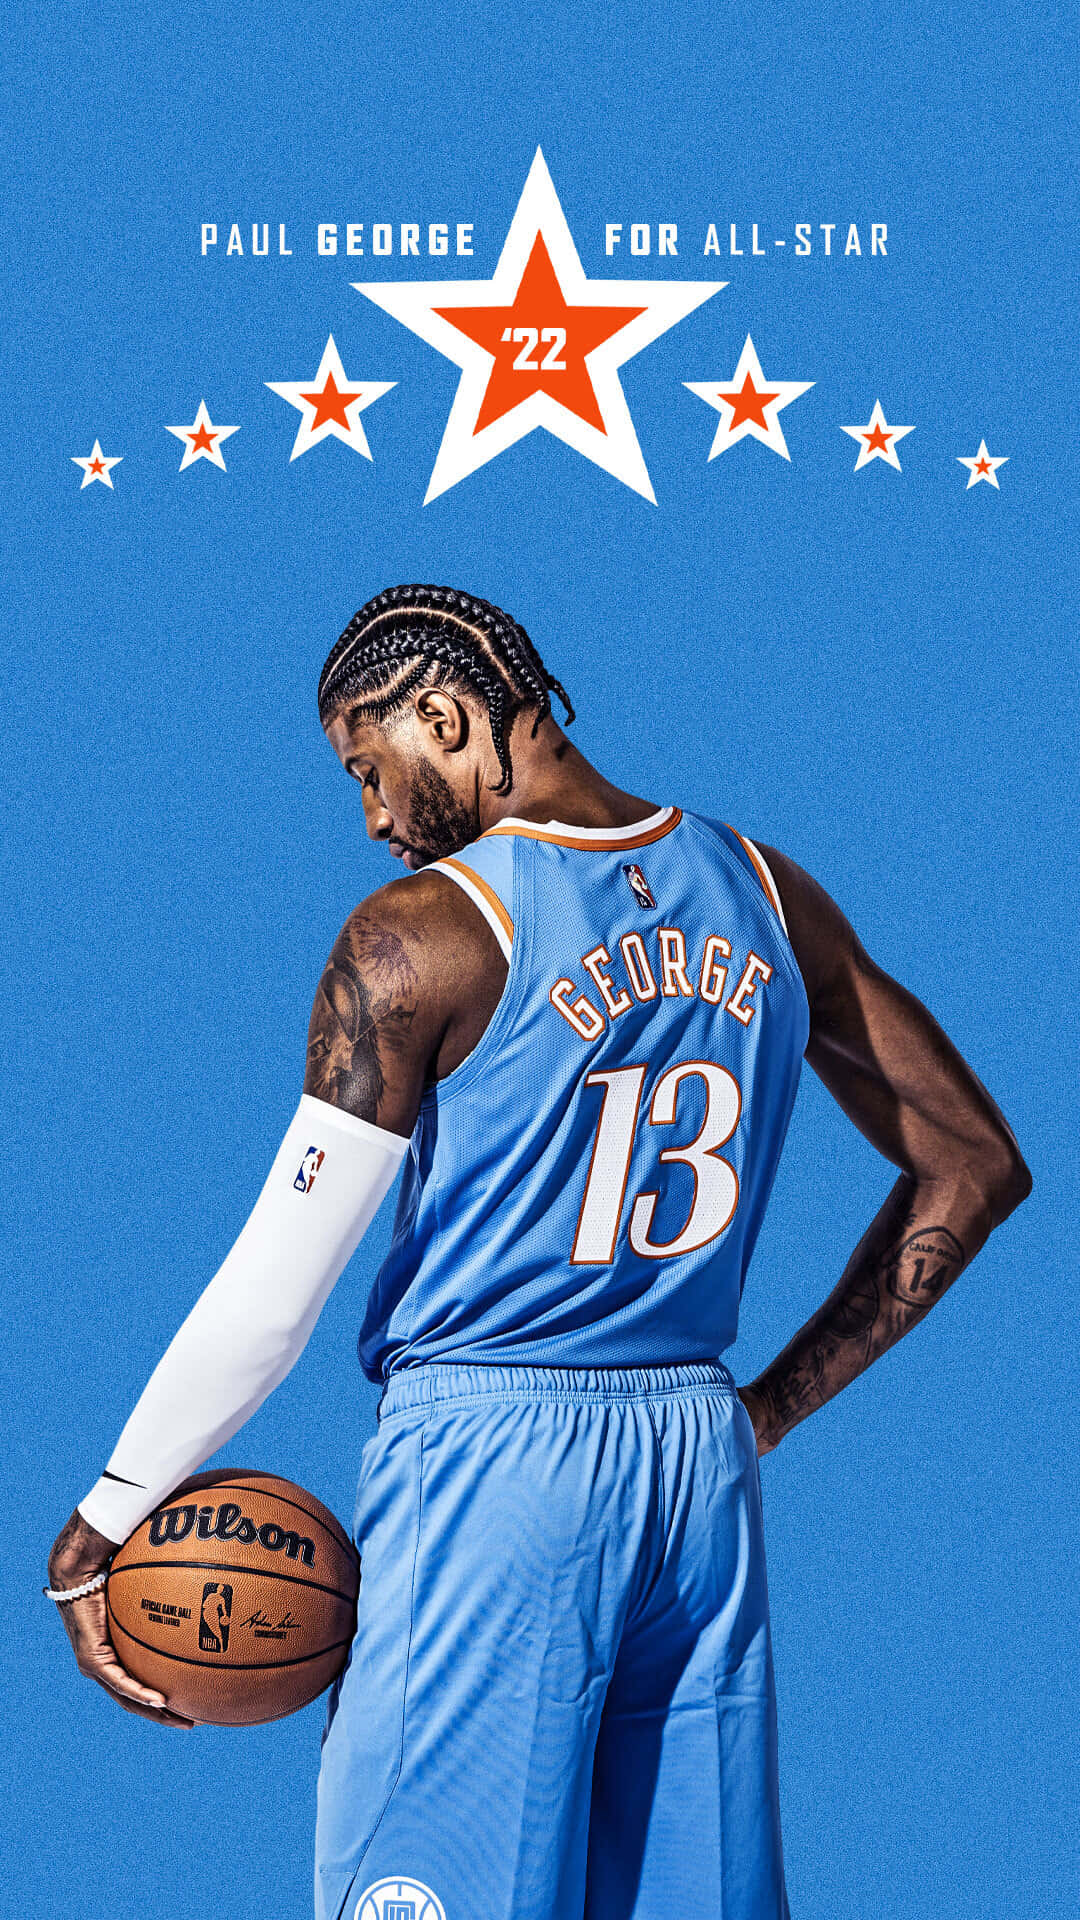 Paulgeorge Von Den Los Angeles Clippers Strahlt Hell Wallpaper